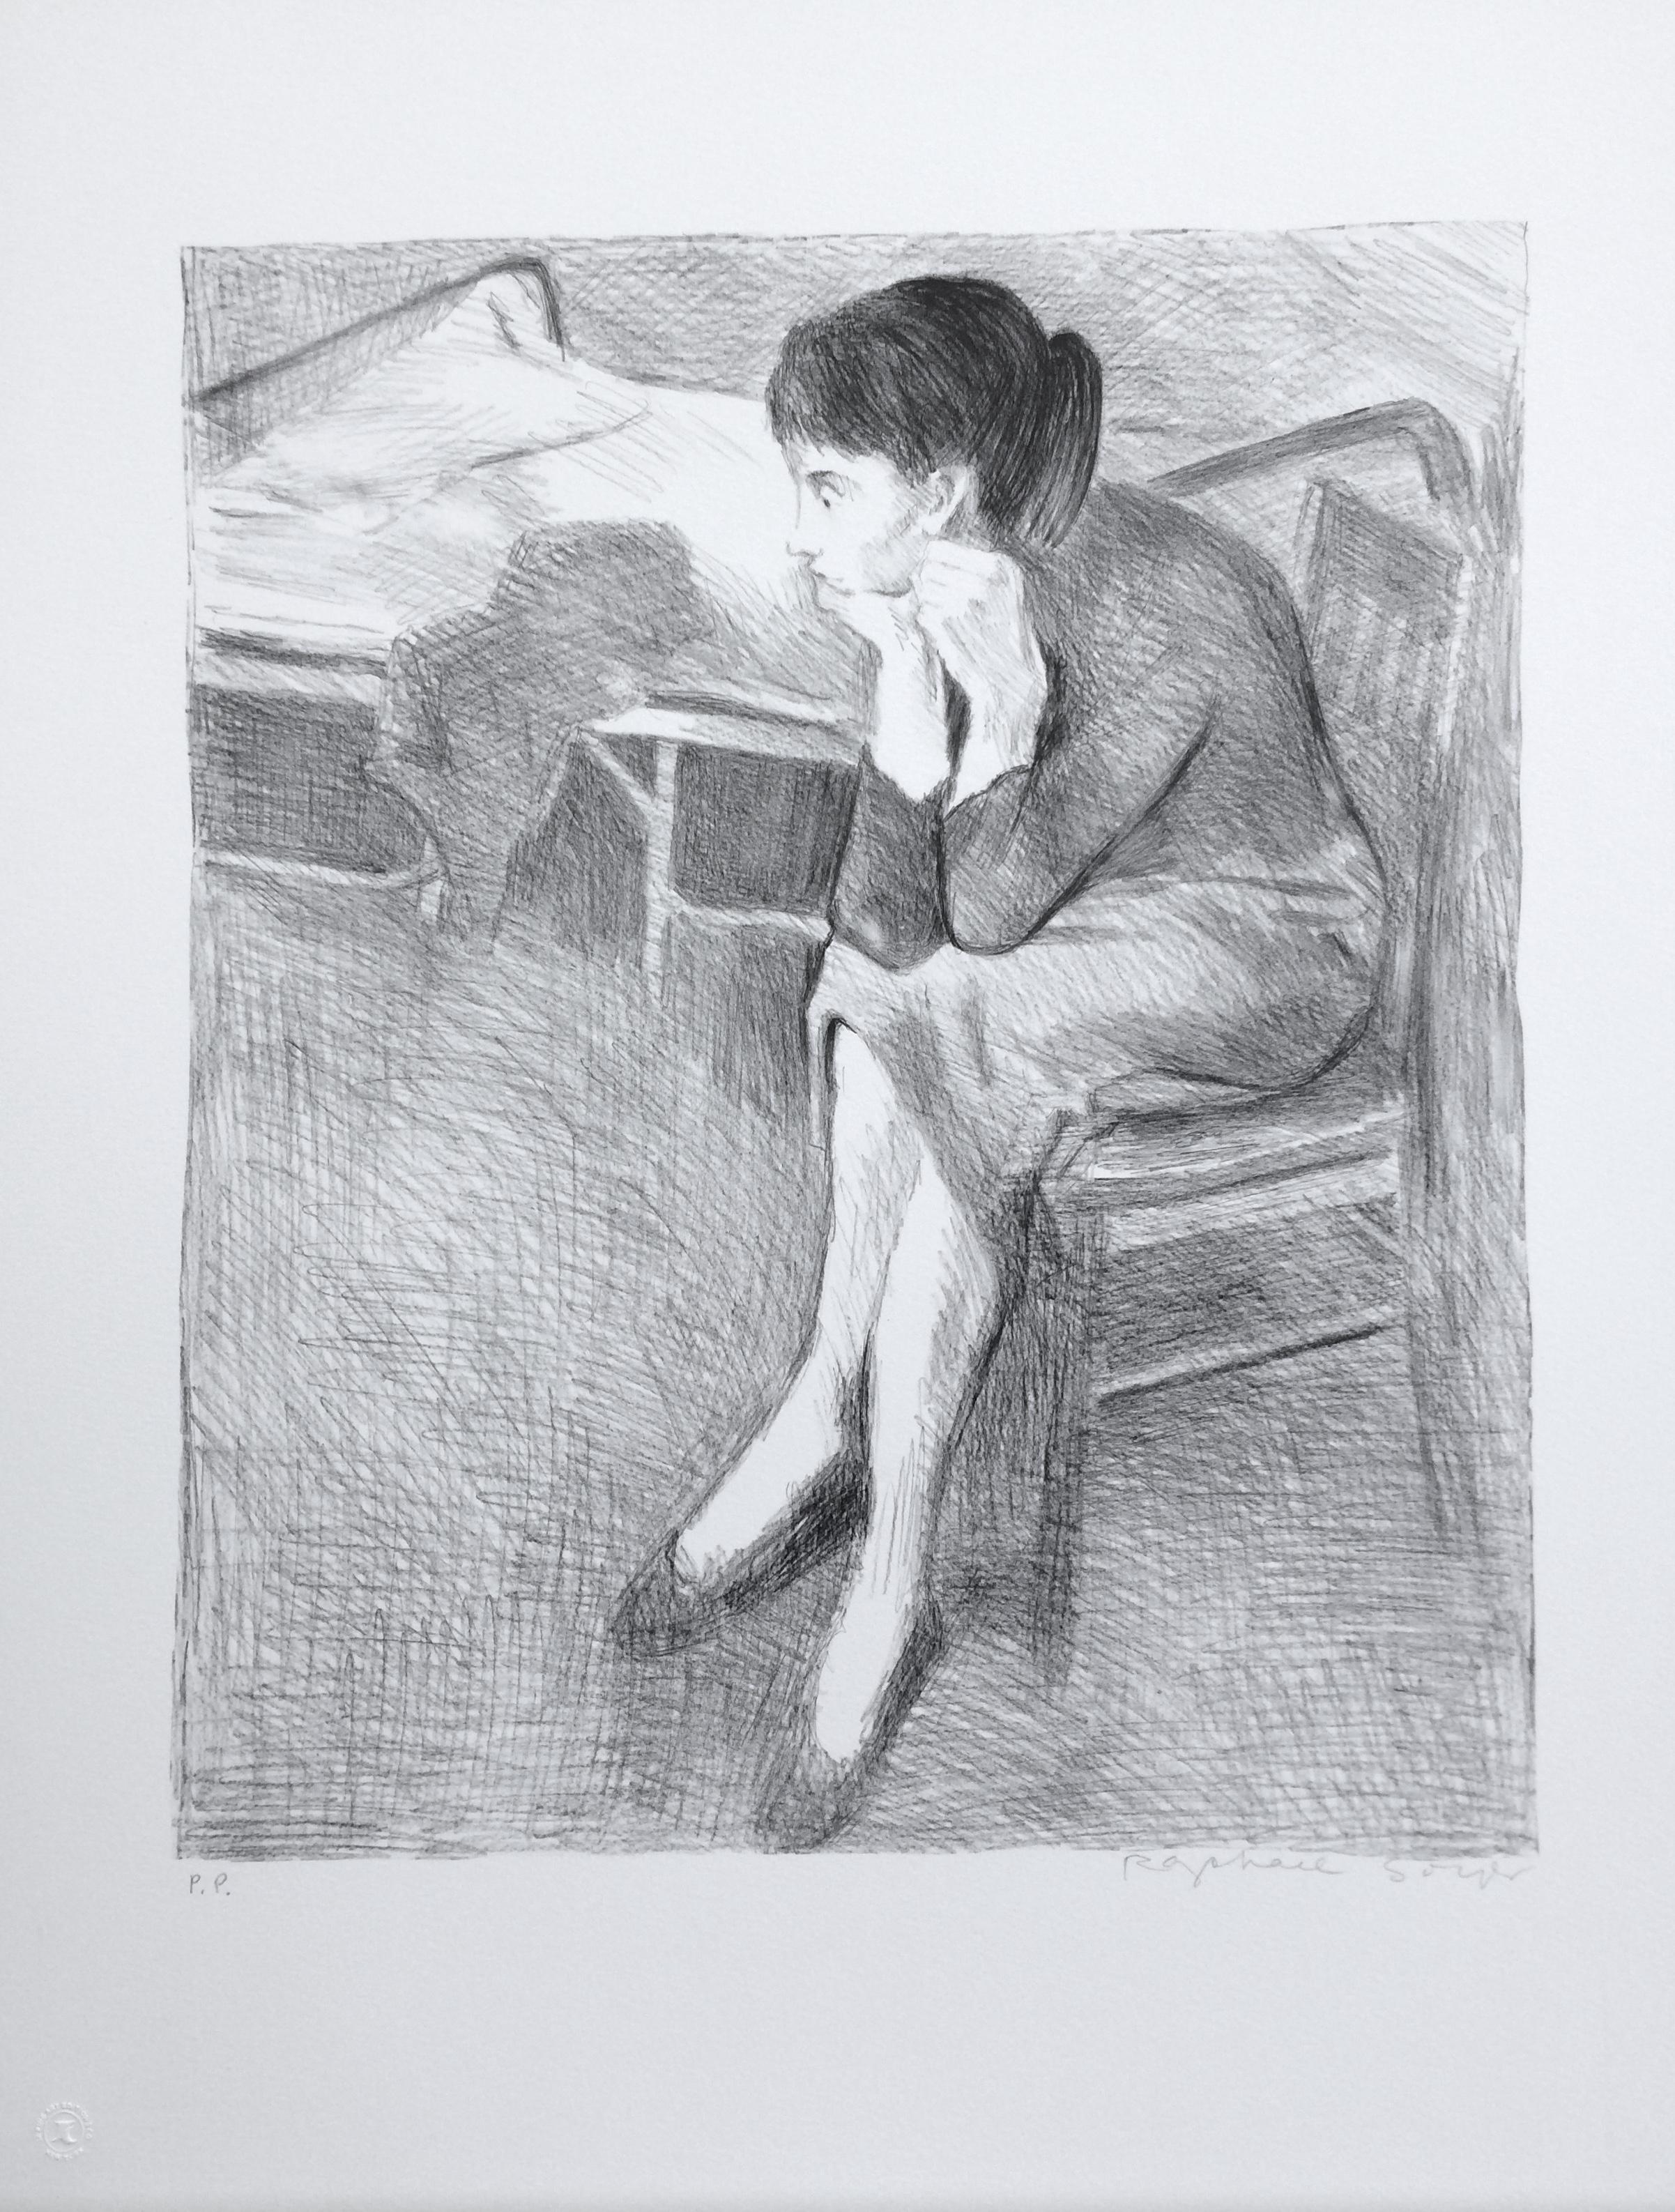 SEATED WOMAN NEAR A BED is an original hand drawn (not digitally or photo reproduced) limited edition lithograph by the artist Raphael Soyer - Russian/American Social Realism Painter, 1899-1987. Printed using traditional hand lithography techniques